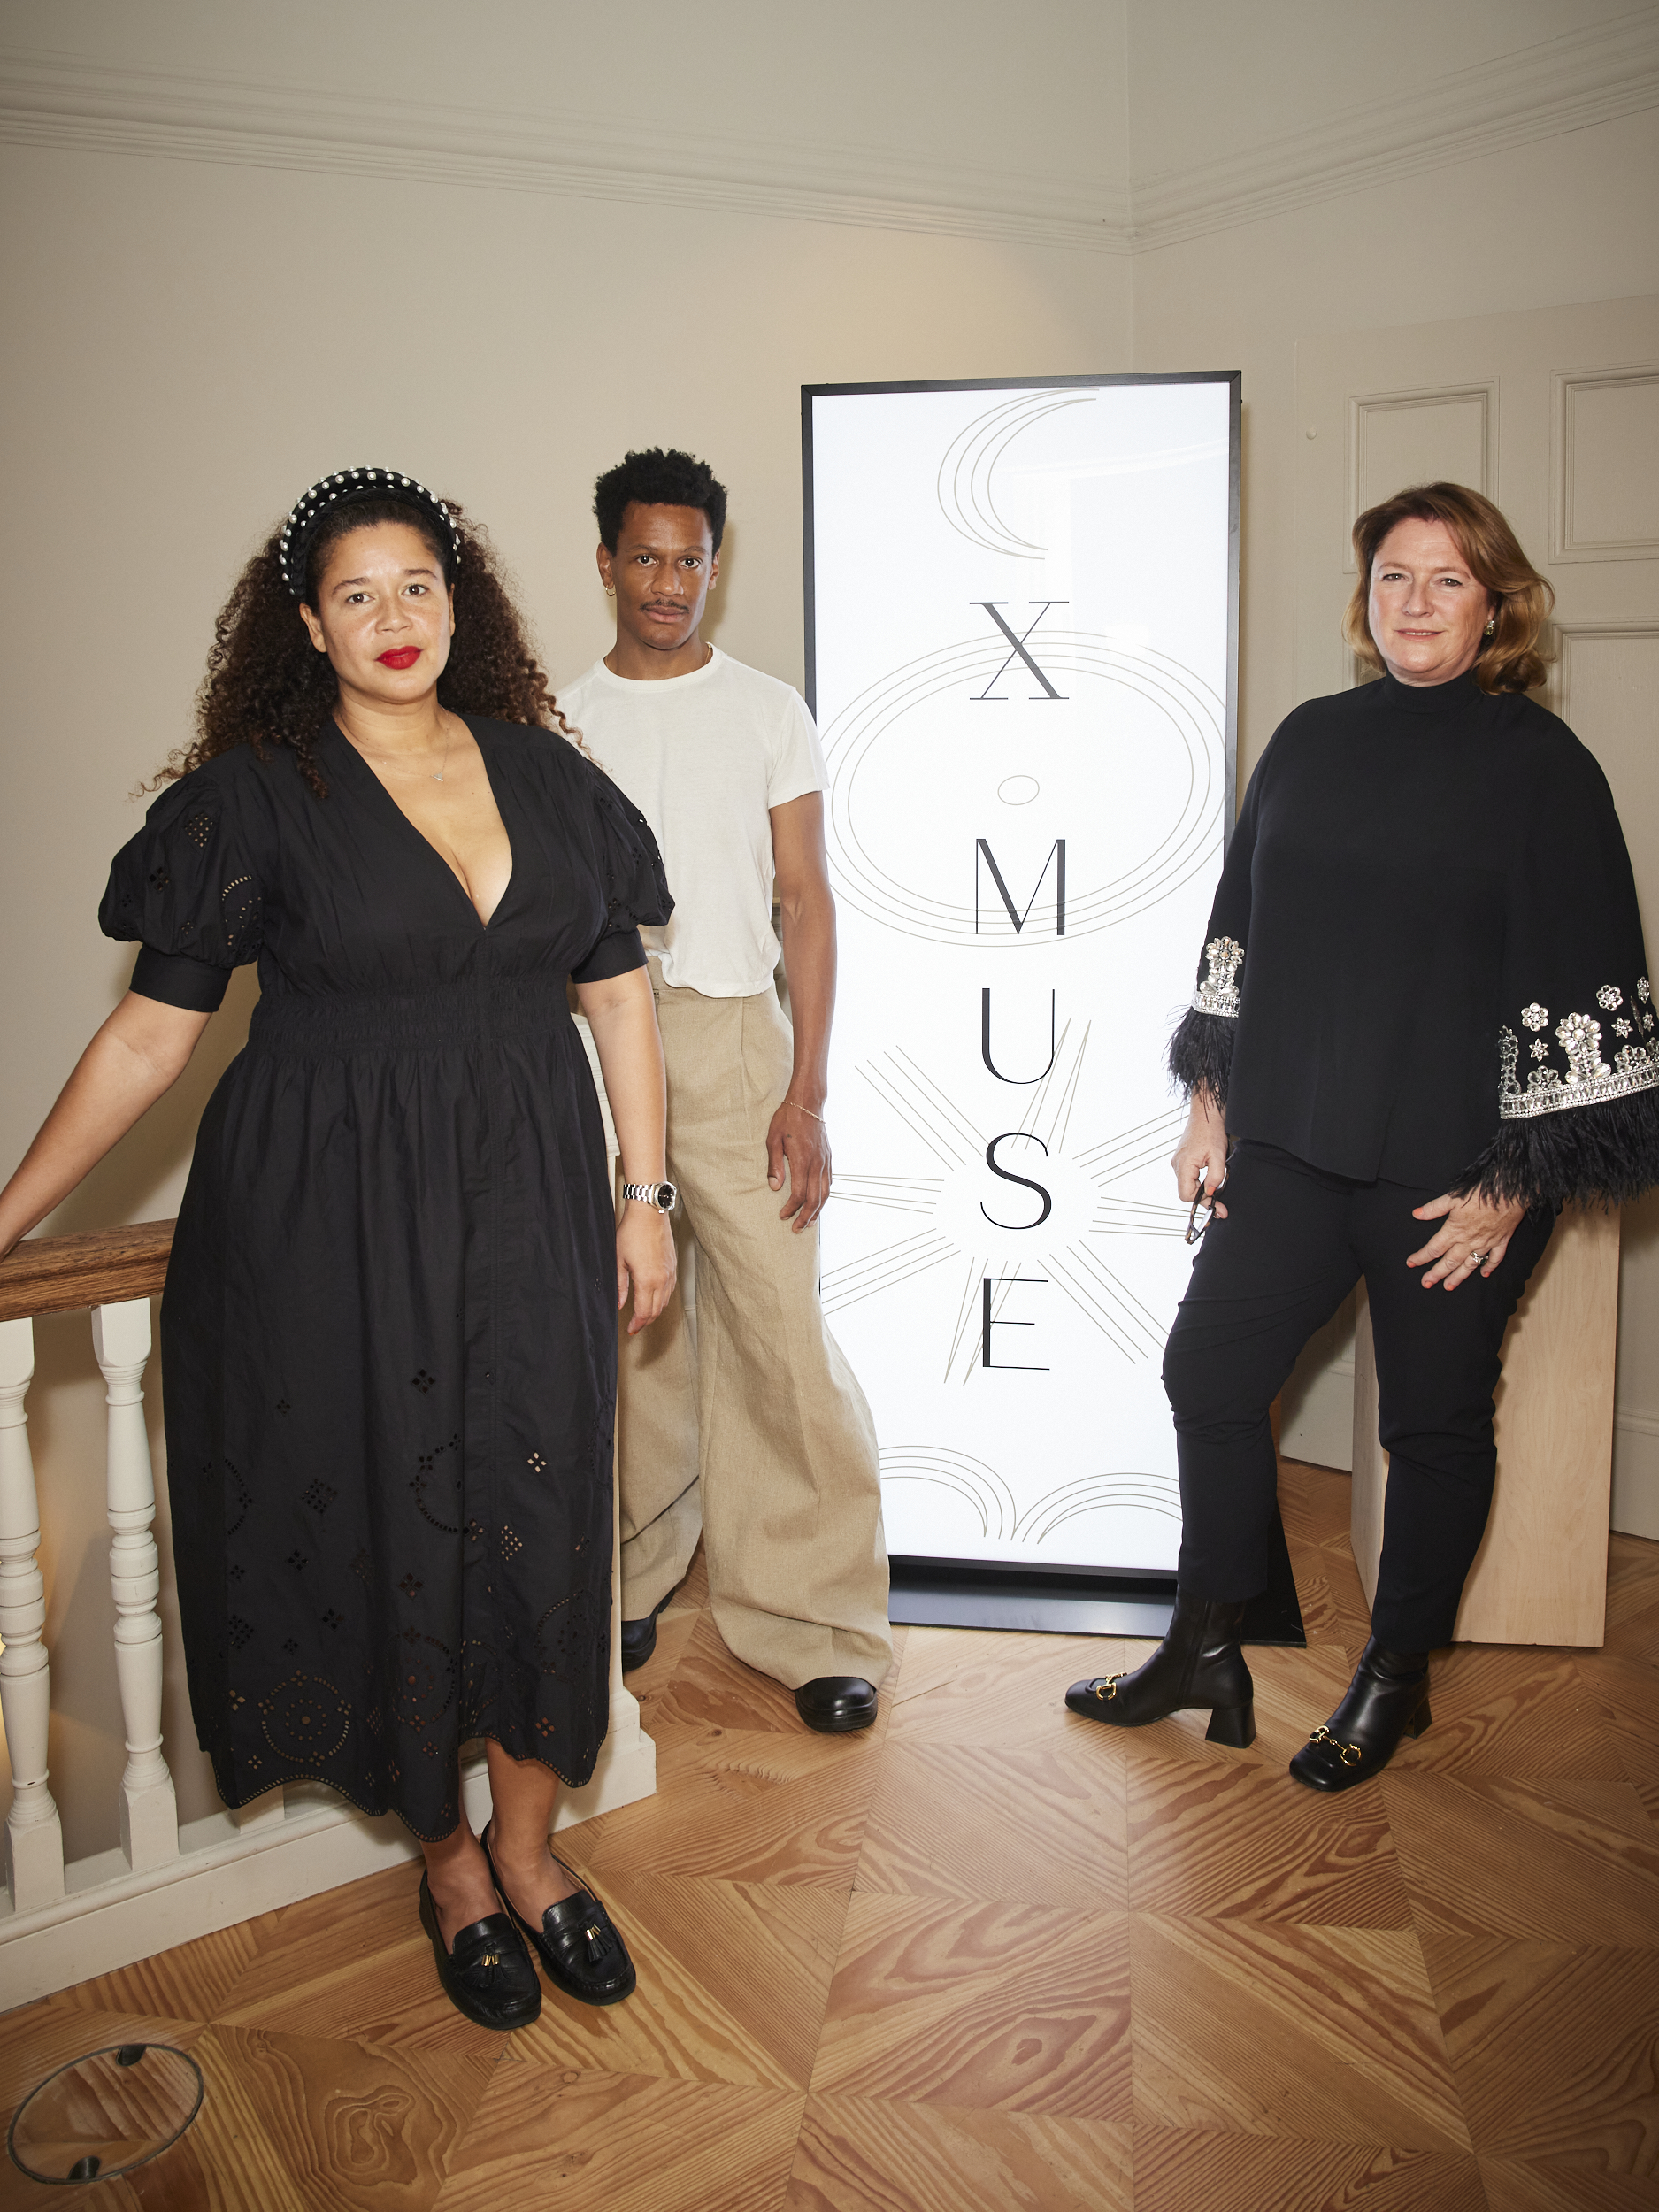 Alberta Whittle, Lewis Gilbert and Nicky Wilson at the Xmuse event